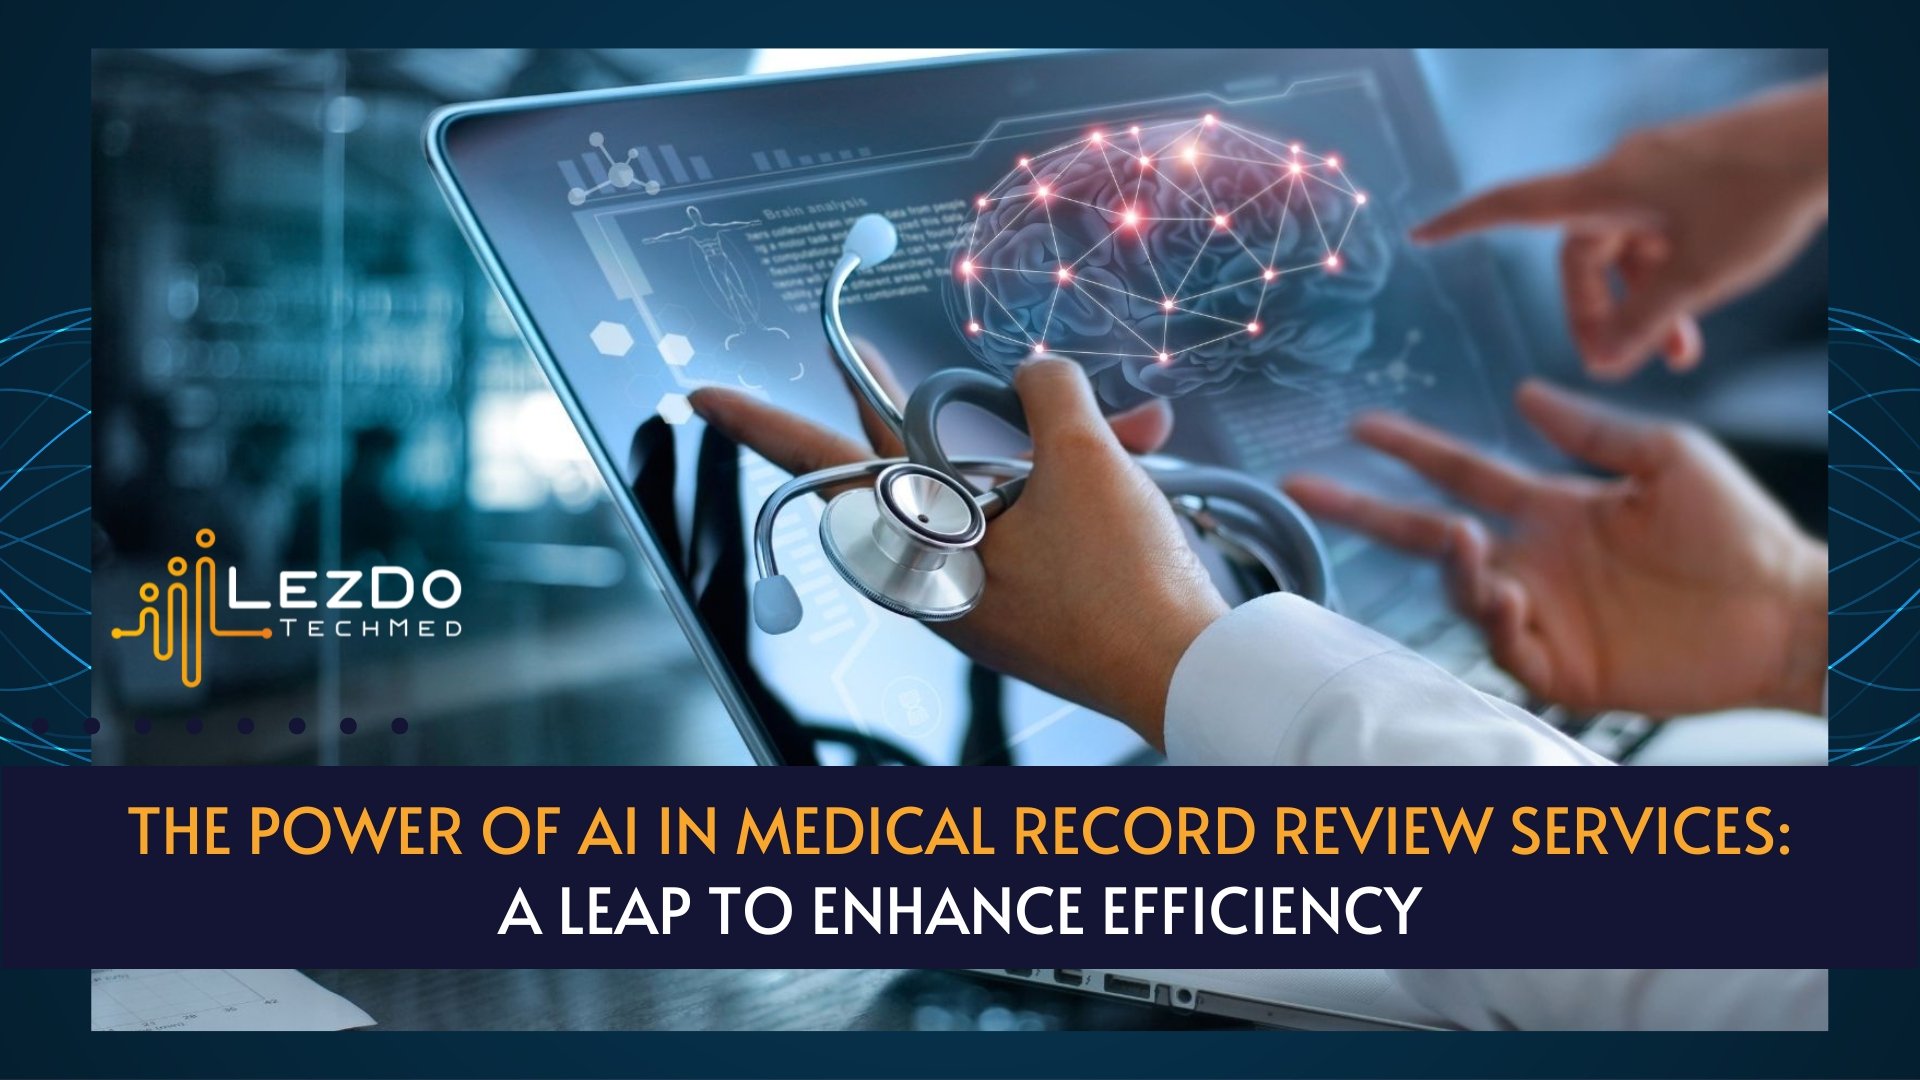 The Power of AI in Medical Record Review Services: A Leap to Enhance Efficiency